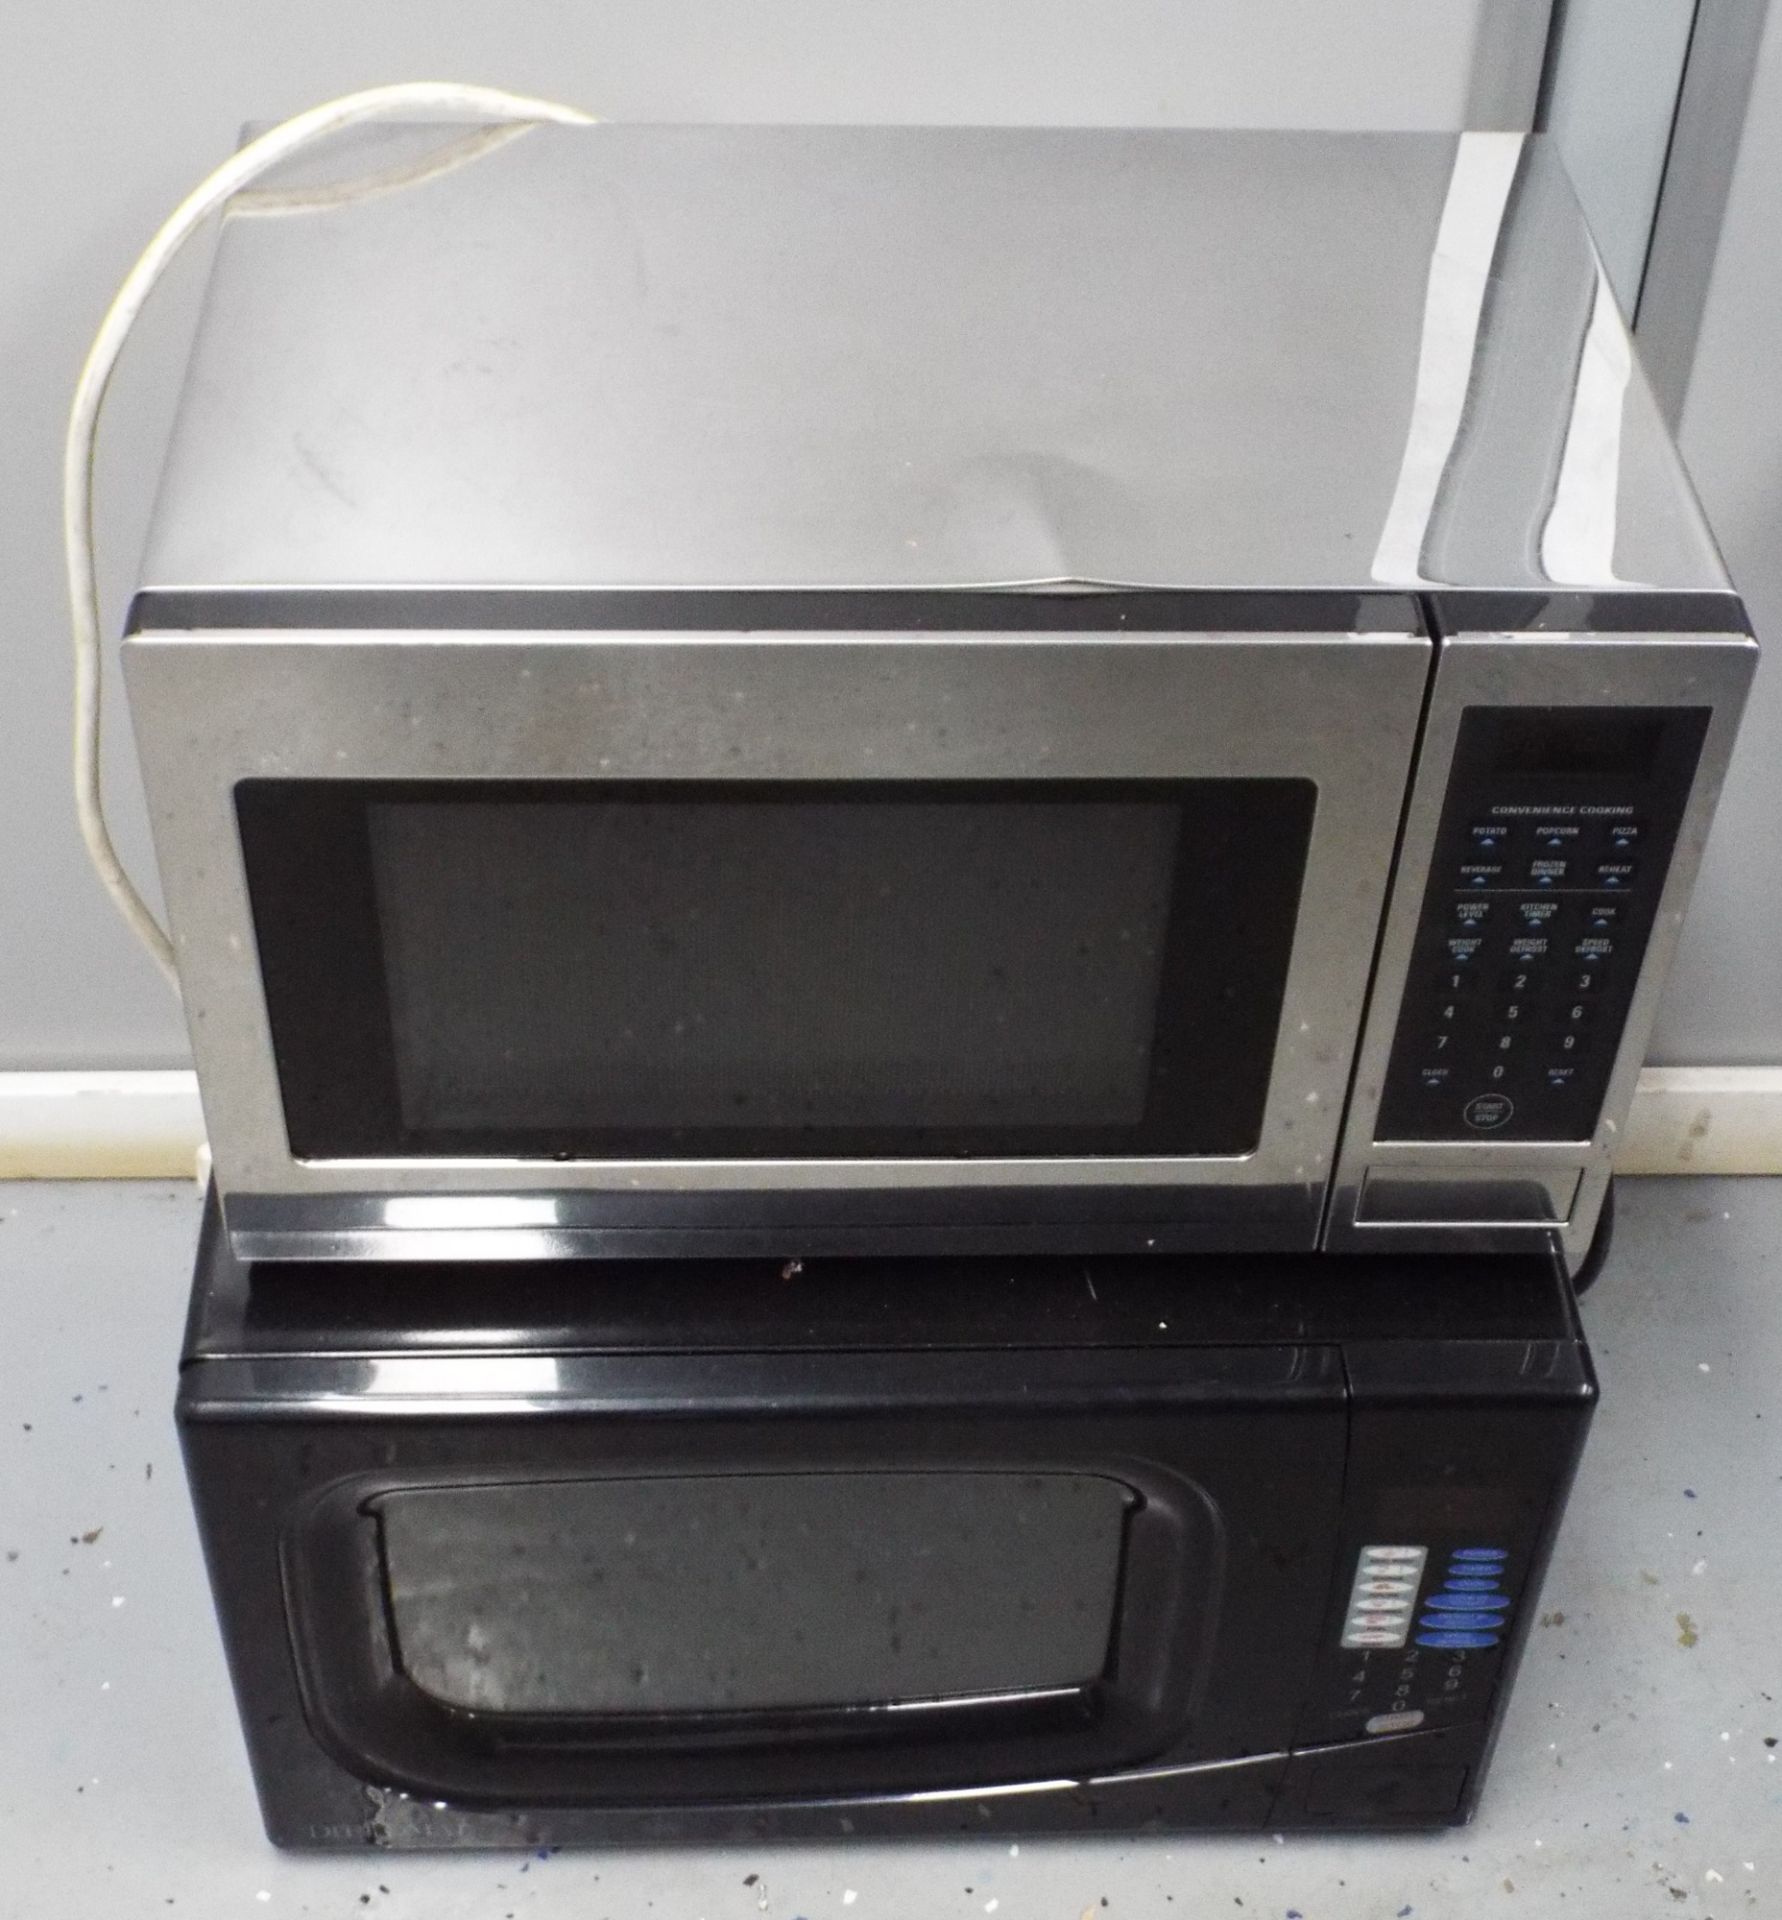 LOT/ LUNCH ROOM APPLIANCES - MAYTAG REFRIGERATOR, (3) MICROWAVES, (2) TOASTERS, (3) ELECTRIC - Image 2 of 3